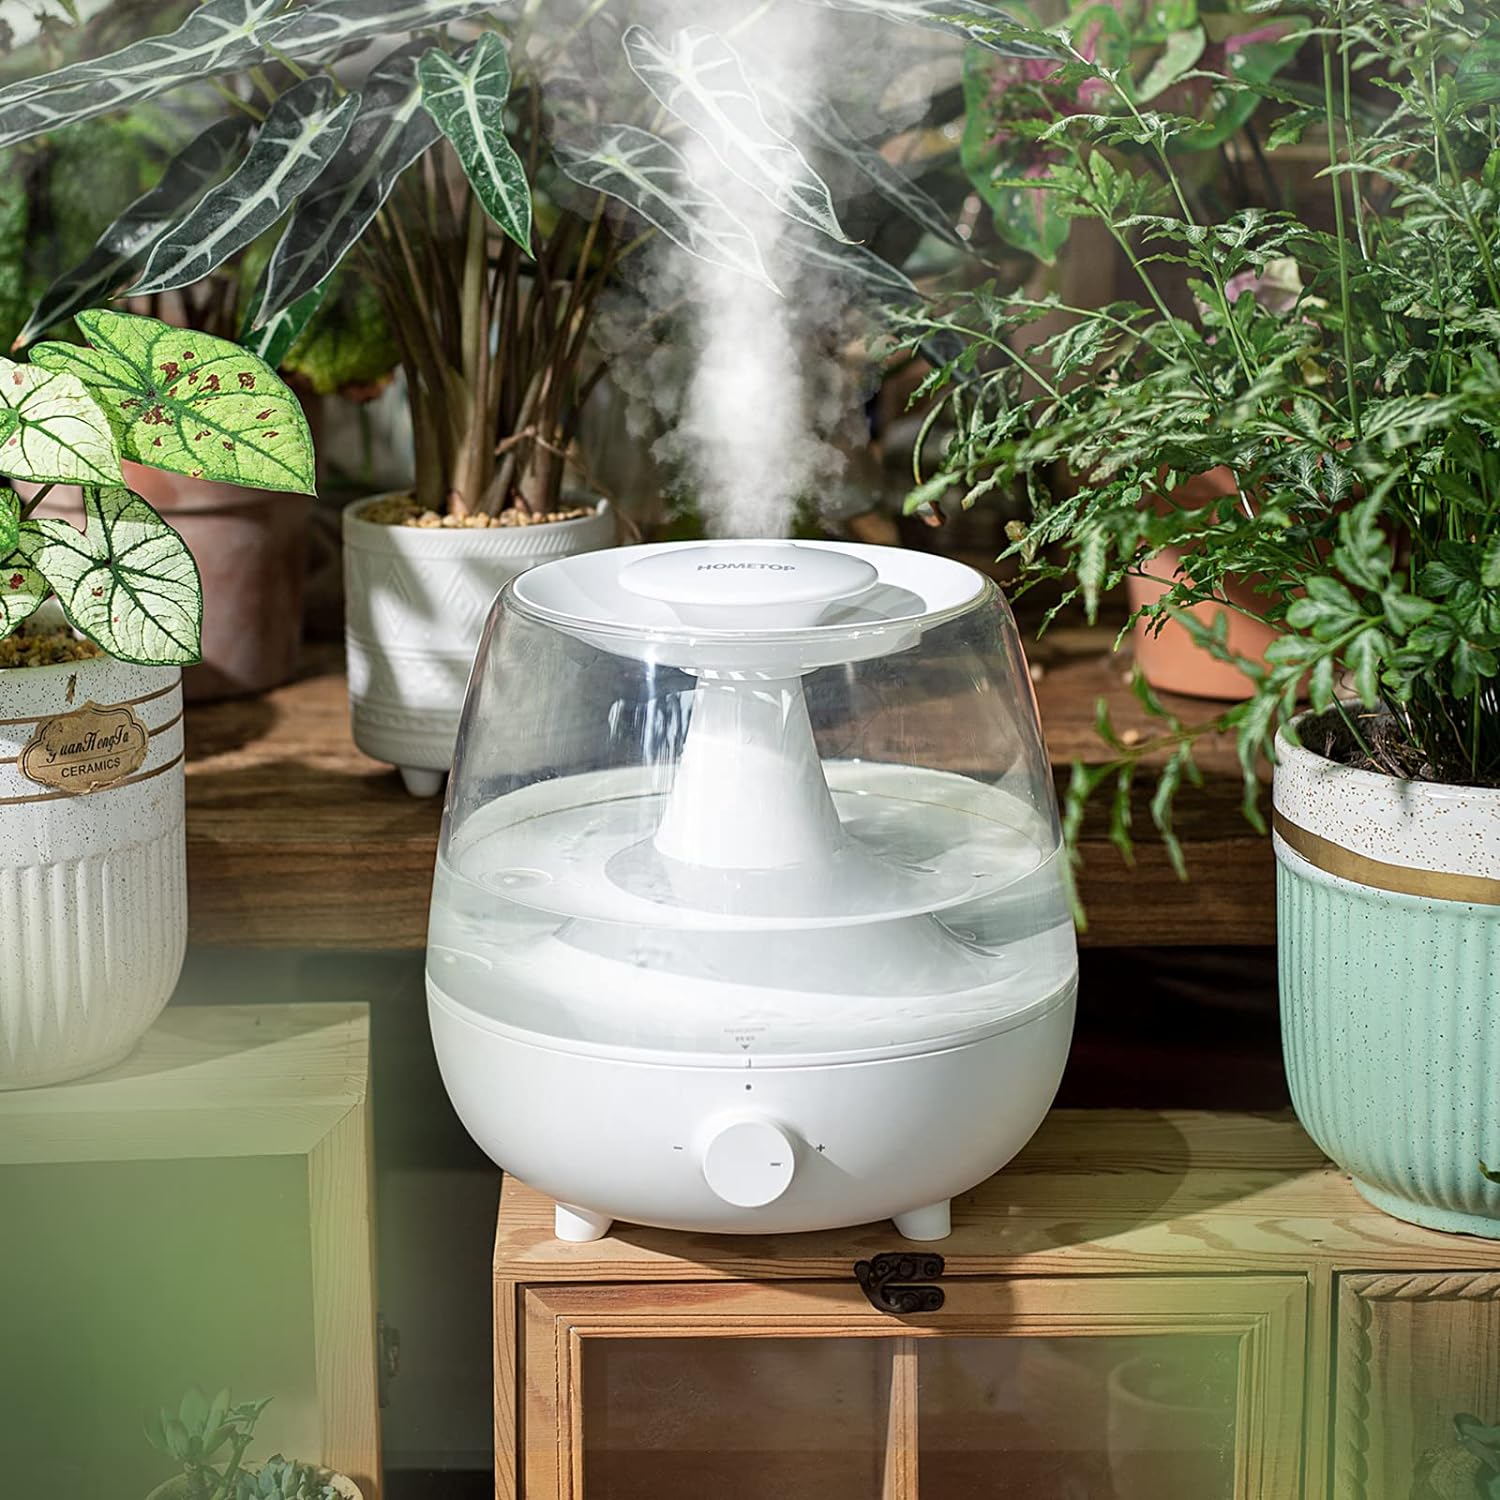 24-Hour Ultrasonic Cool Mist Humidifier, Personal Desktop Humidifiers for Bedroom, Office and Nursery, 2.4L Top Fill Humidifiers with Essential Oils Diffuser, Quiet Rapid Humidification